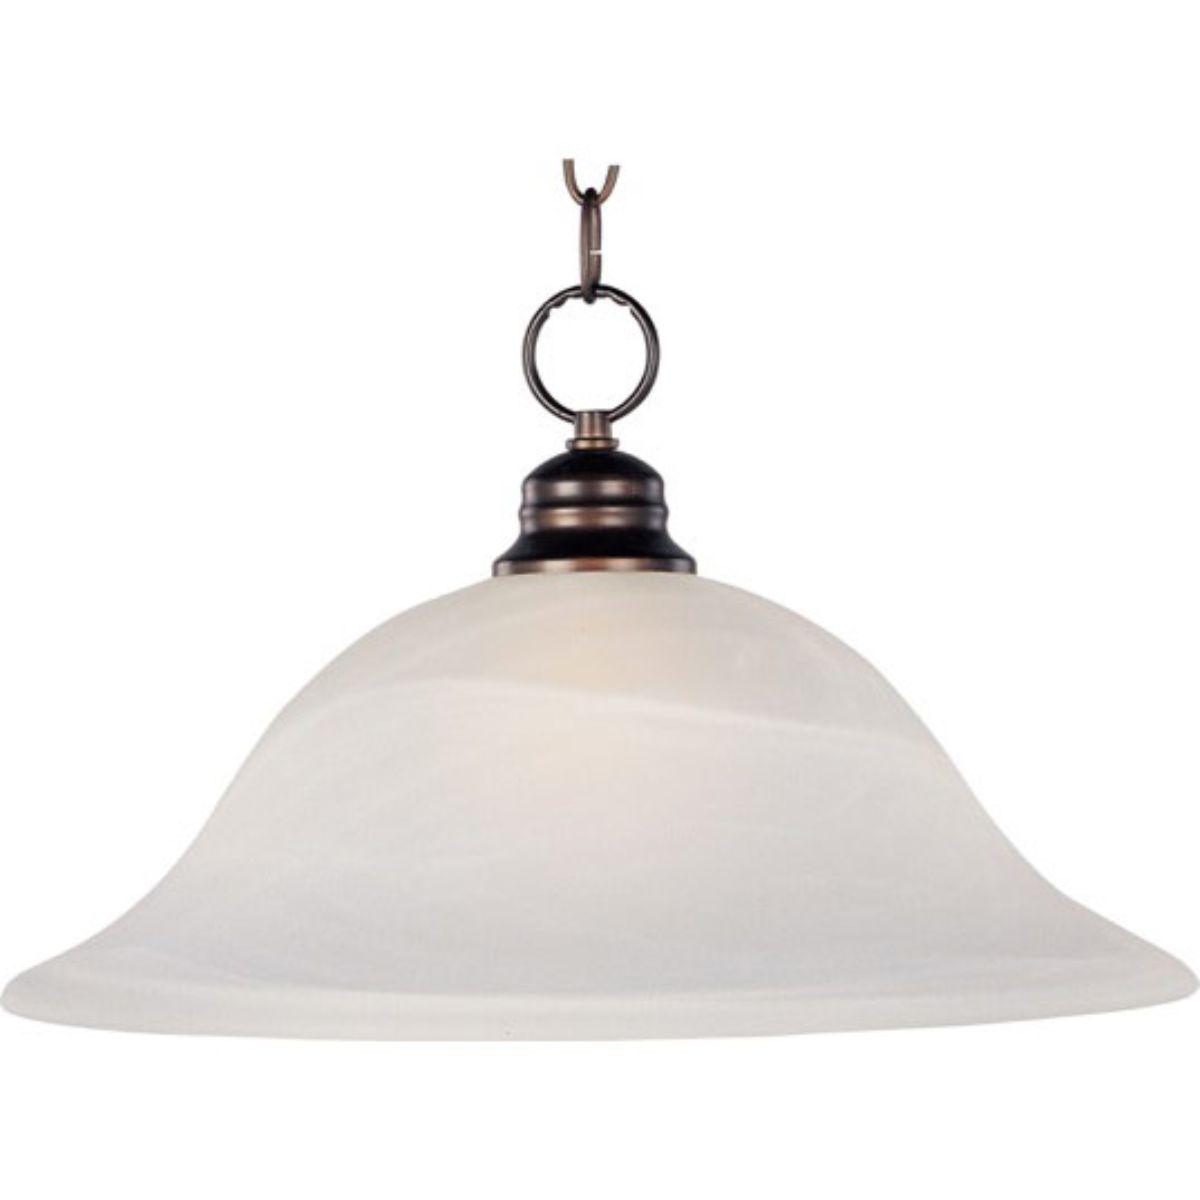 Essentials-9106x 16 in. Pendant Light with Marble Glass - Bees Lighting